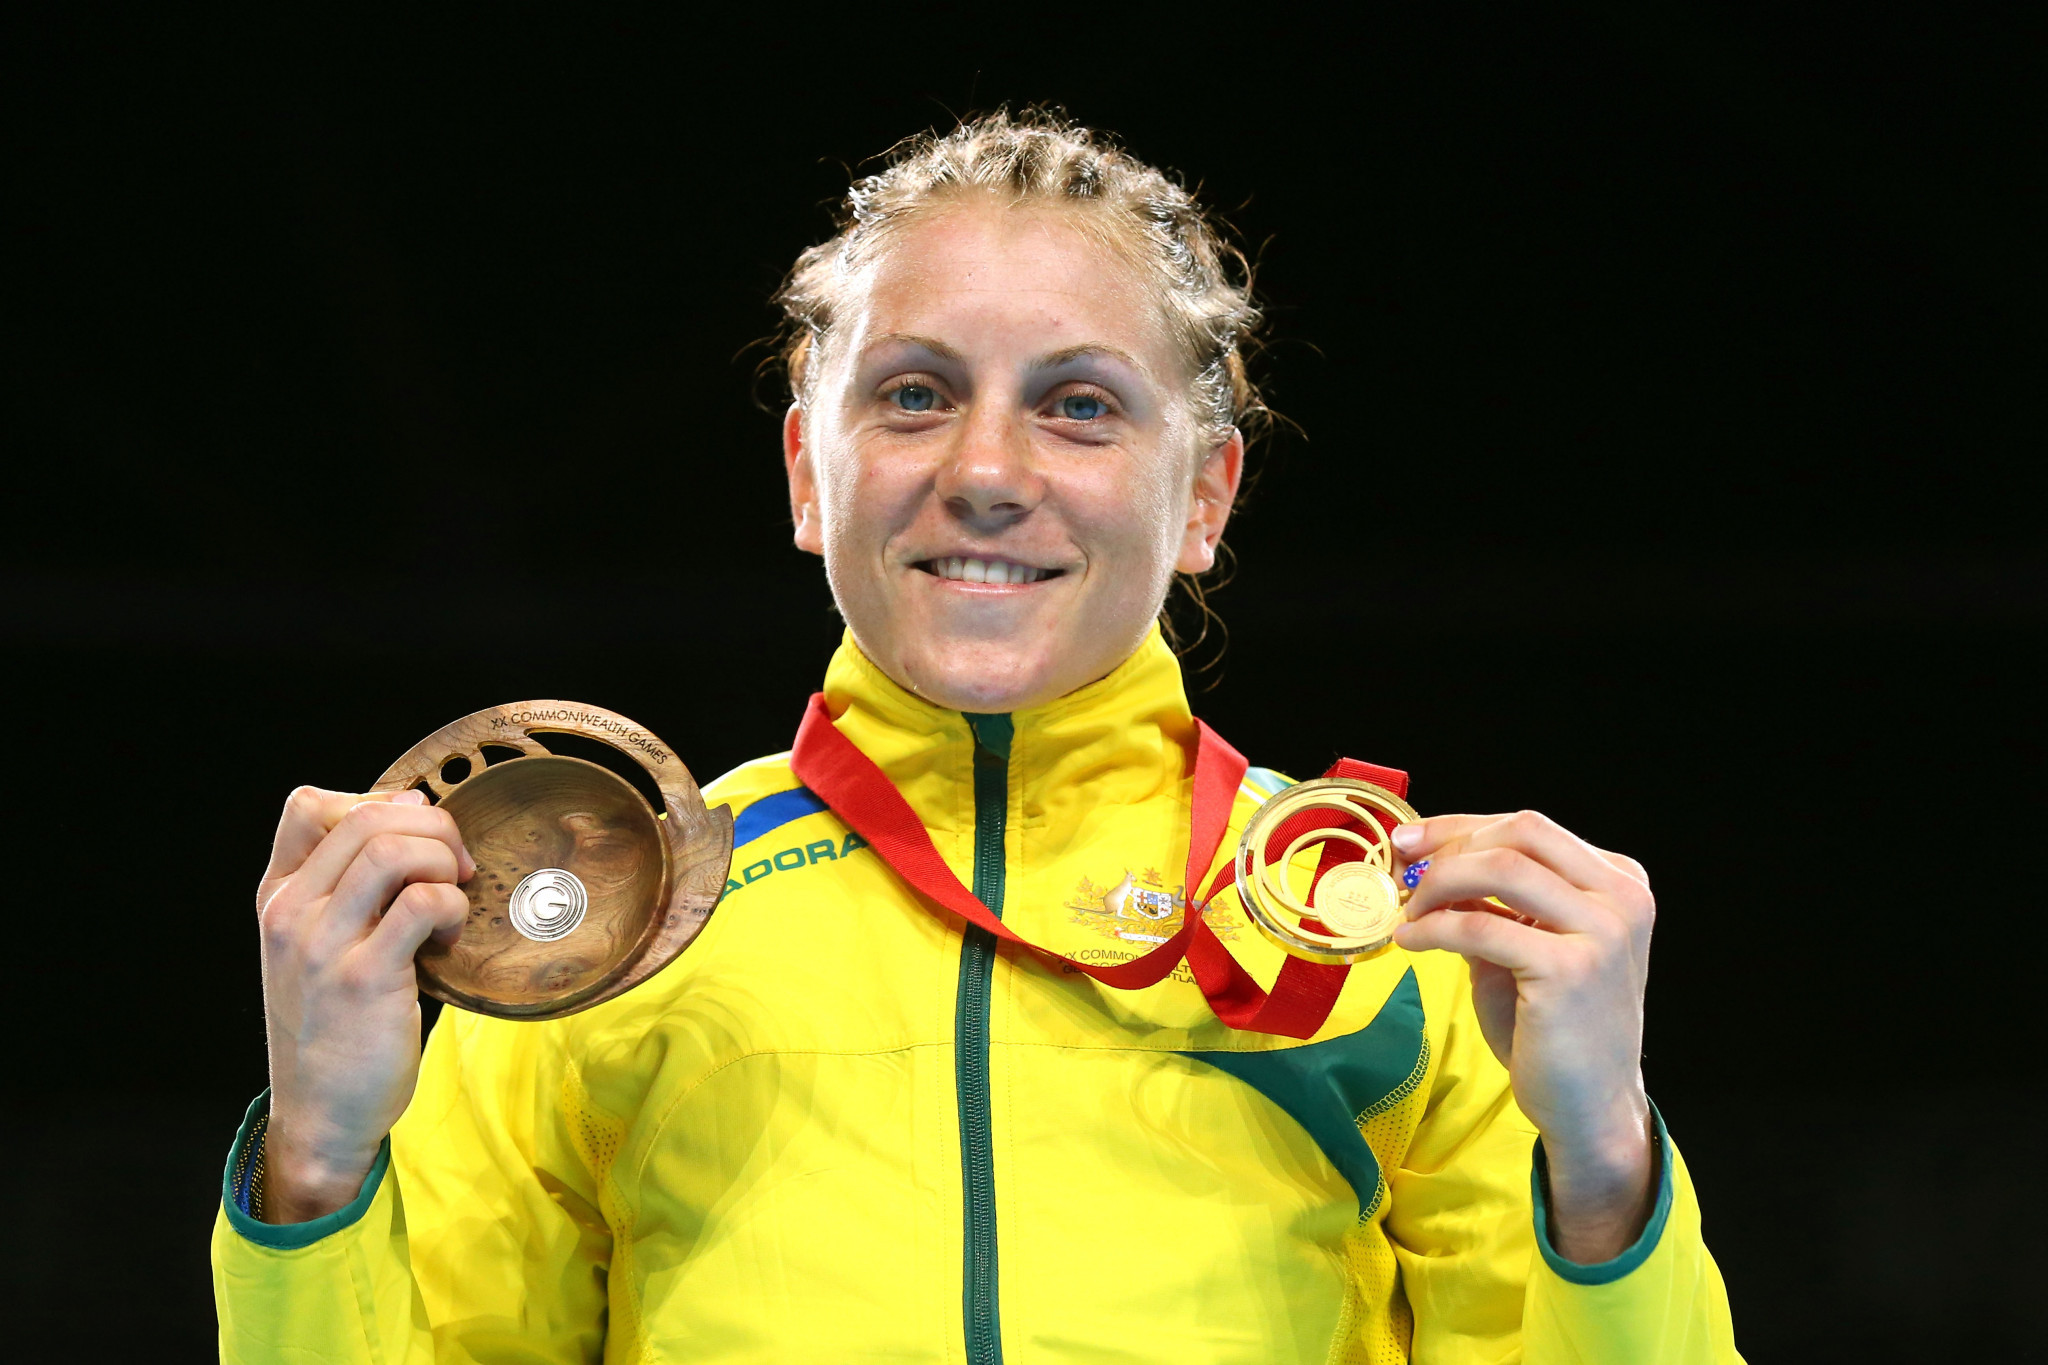 Watts joins Adams and Marshall as defending Commonwealth Games boxing champions missing Gold Coast 2018